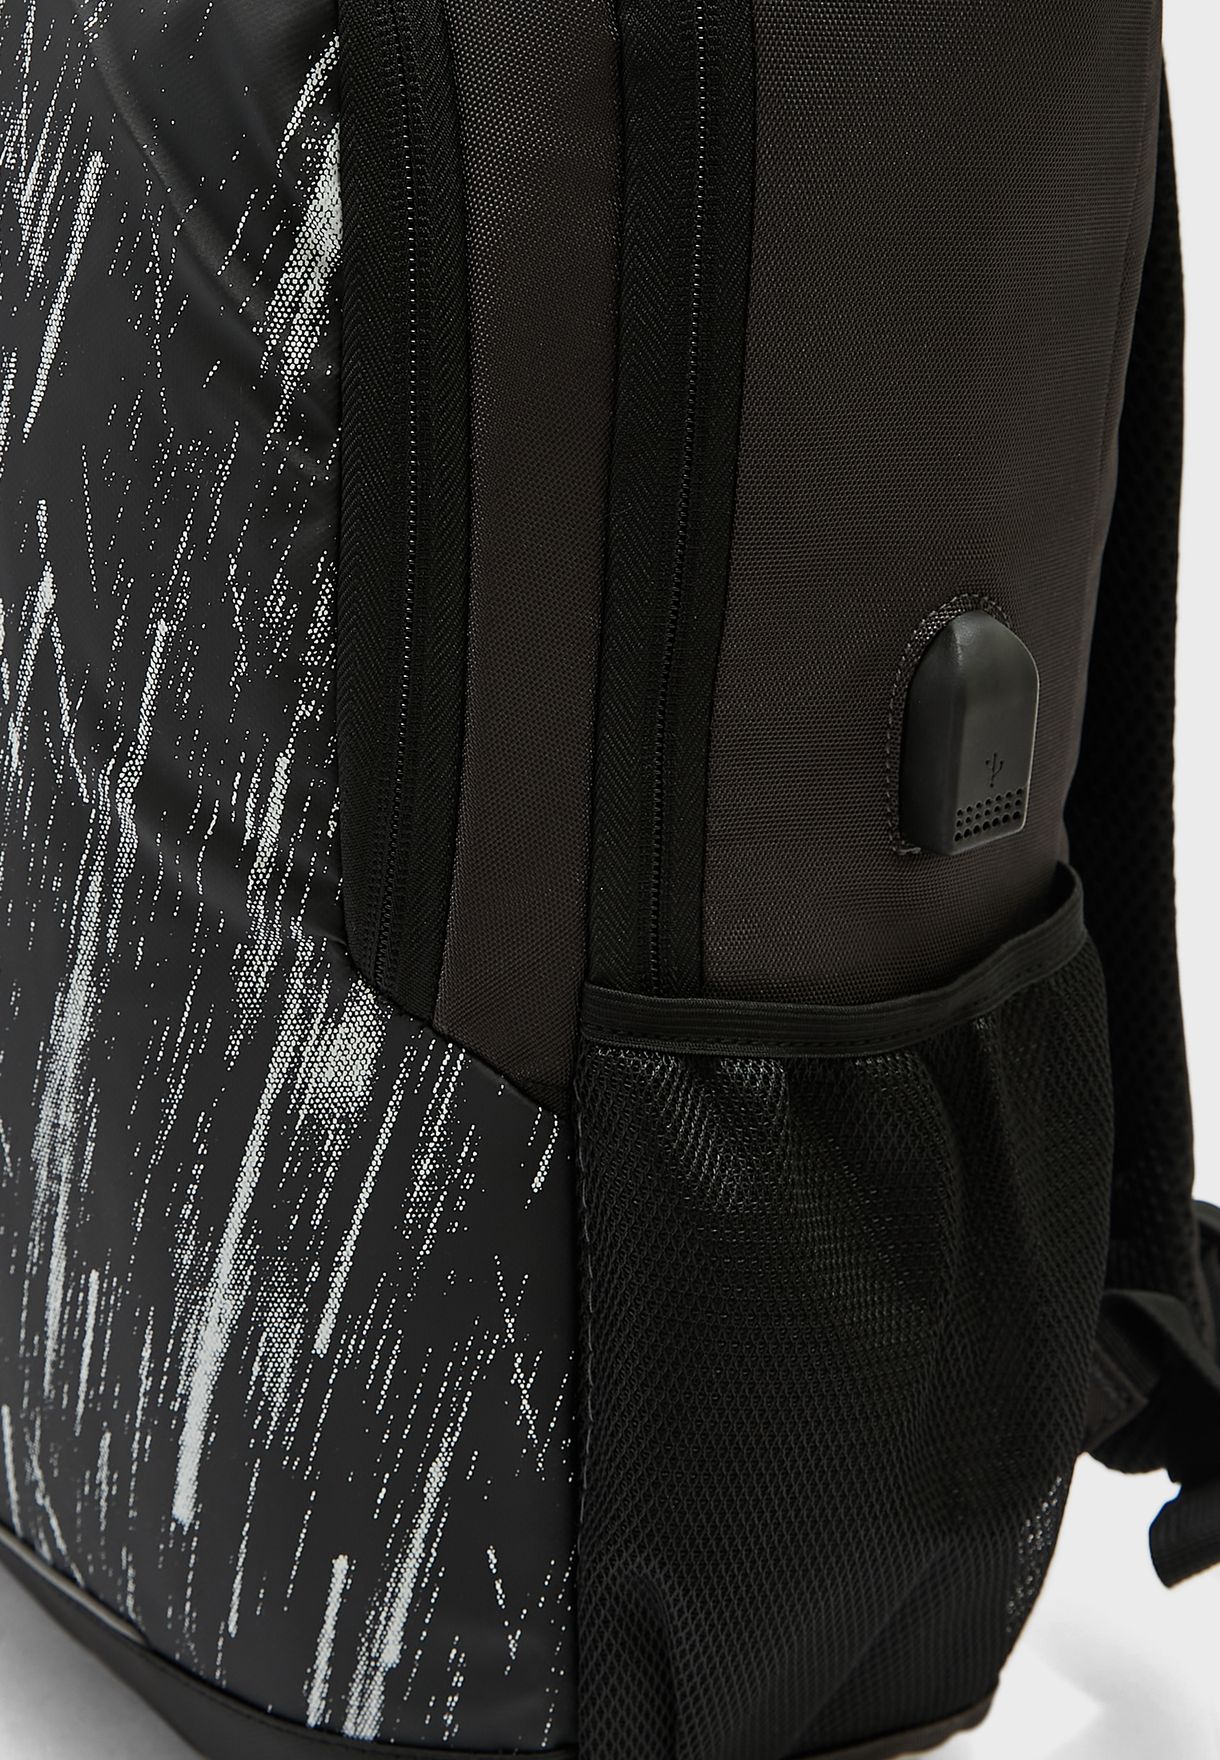 Structured Backpack With Laptop Compartment